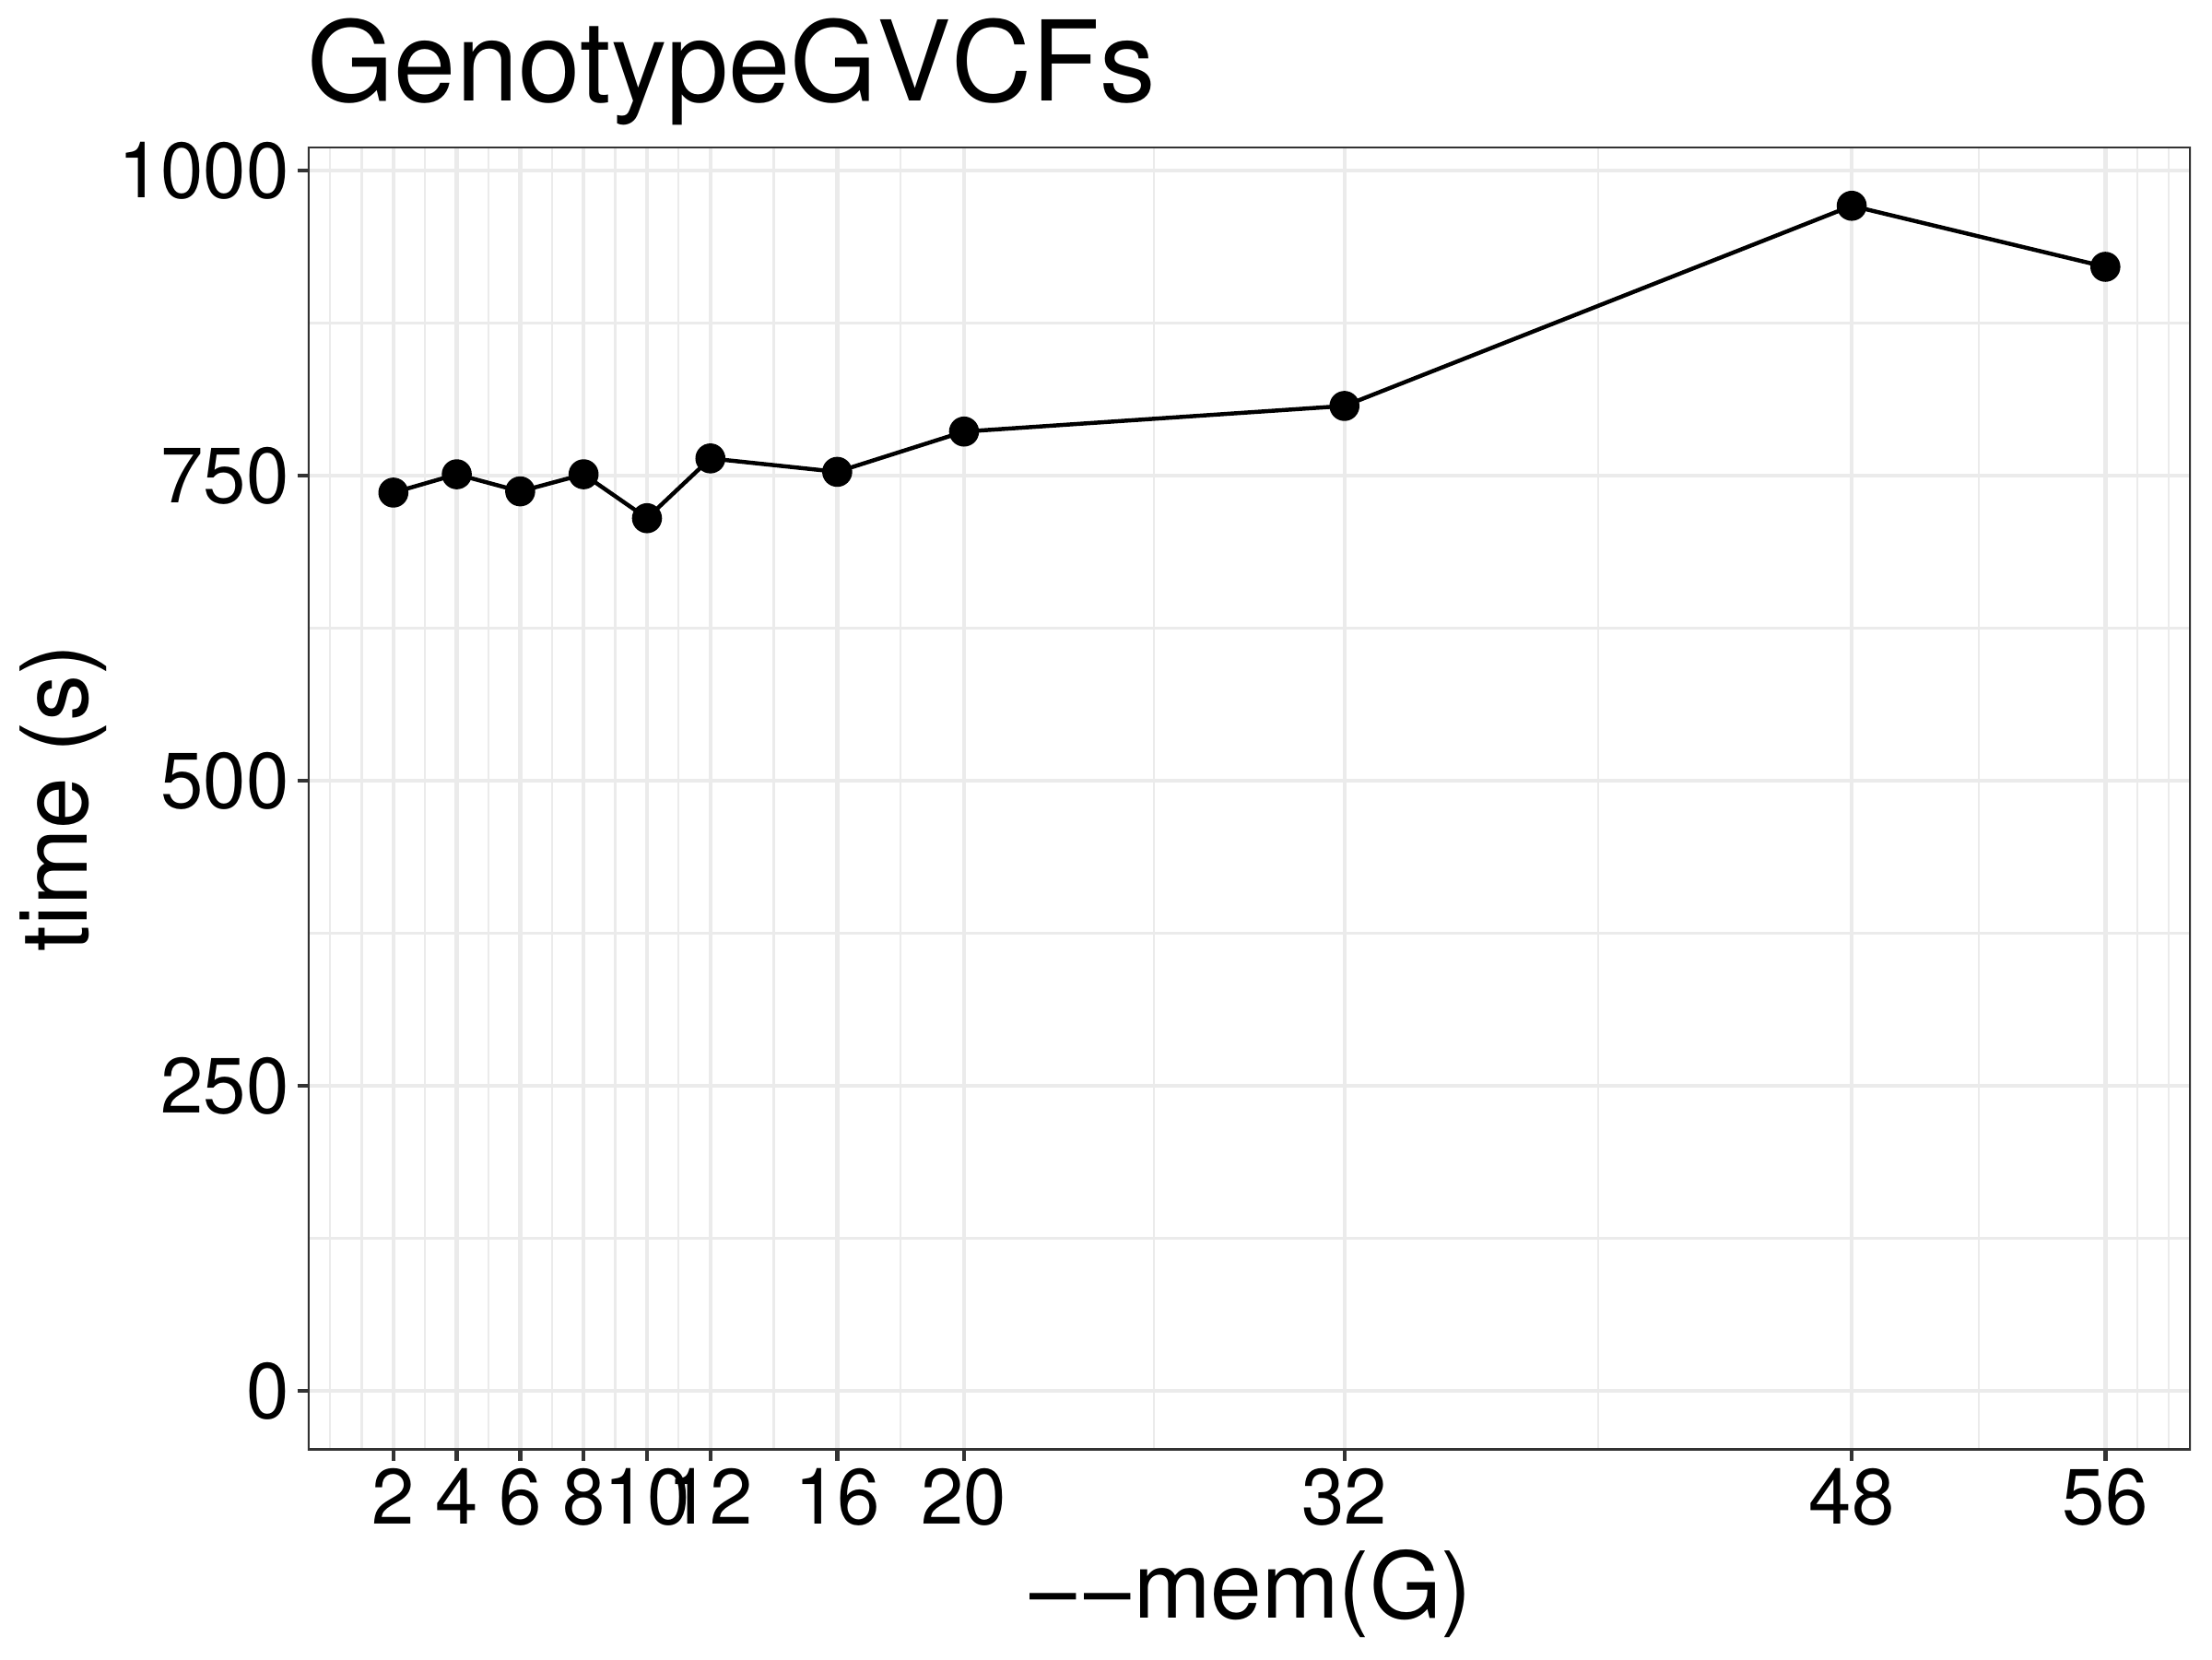 Runtime of GenotypeGVCFs as a function of memory